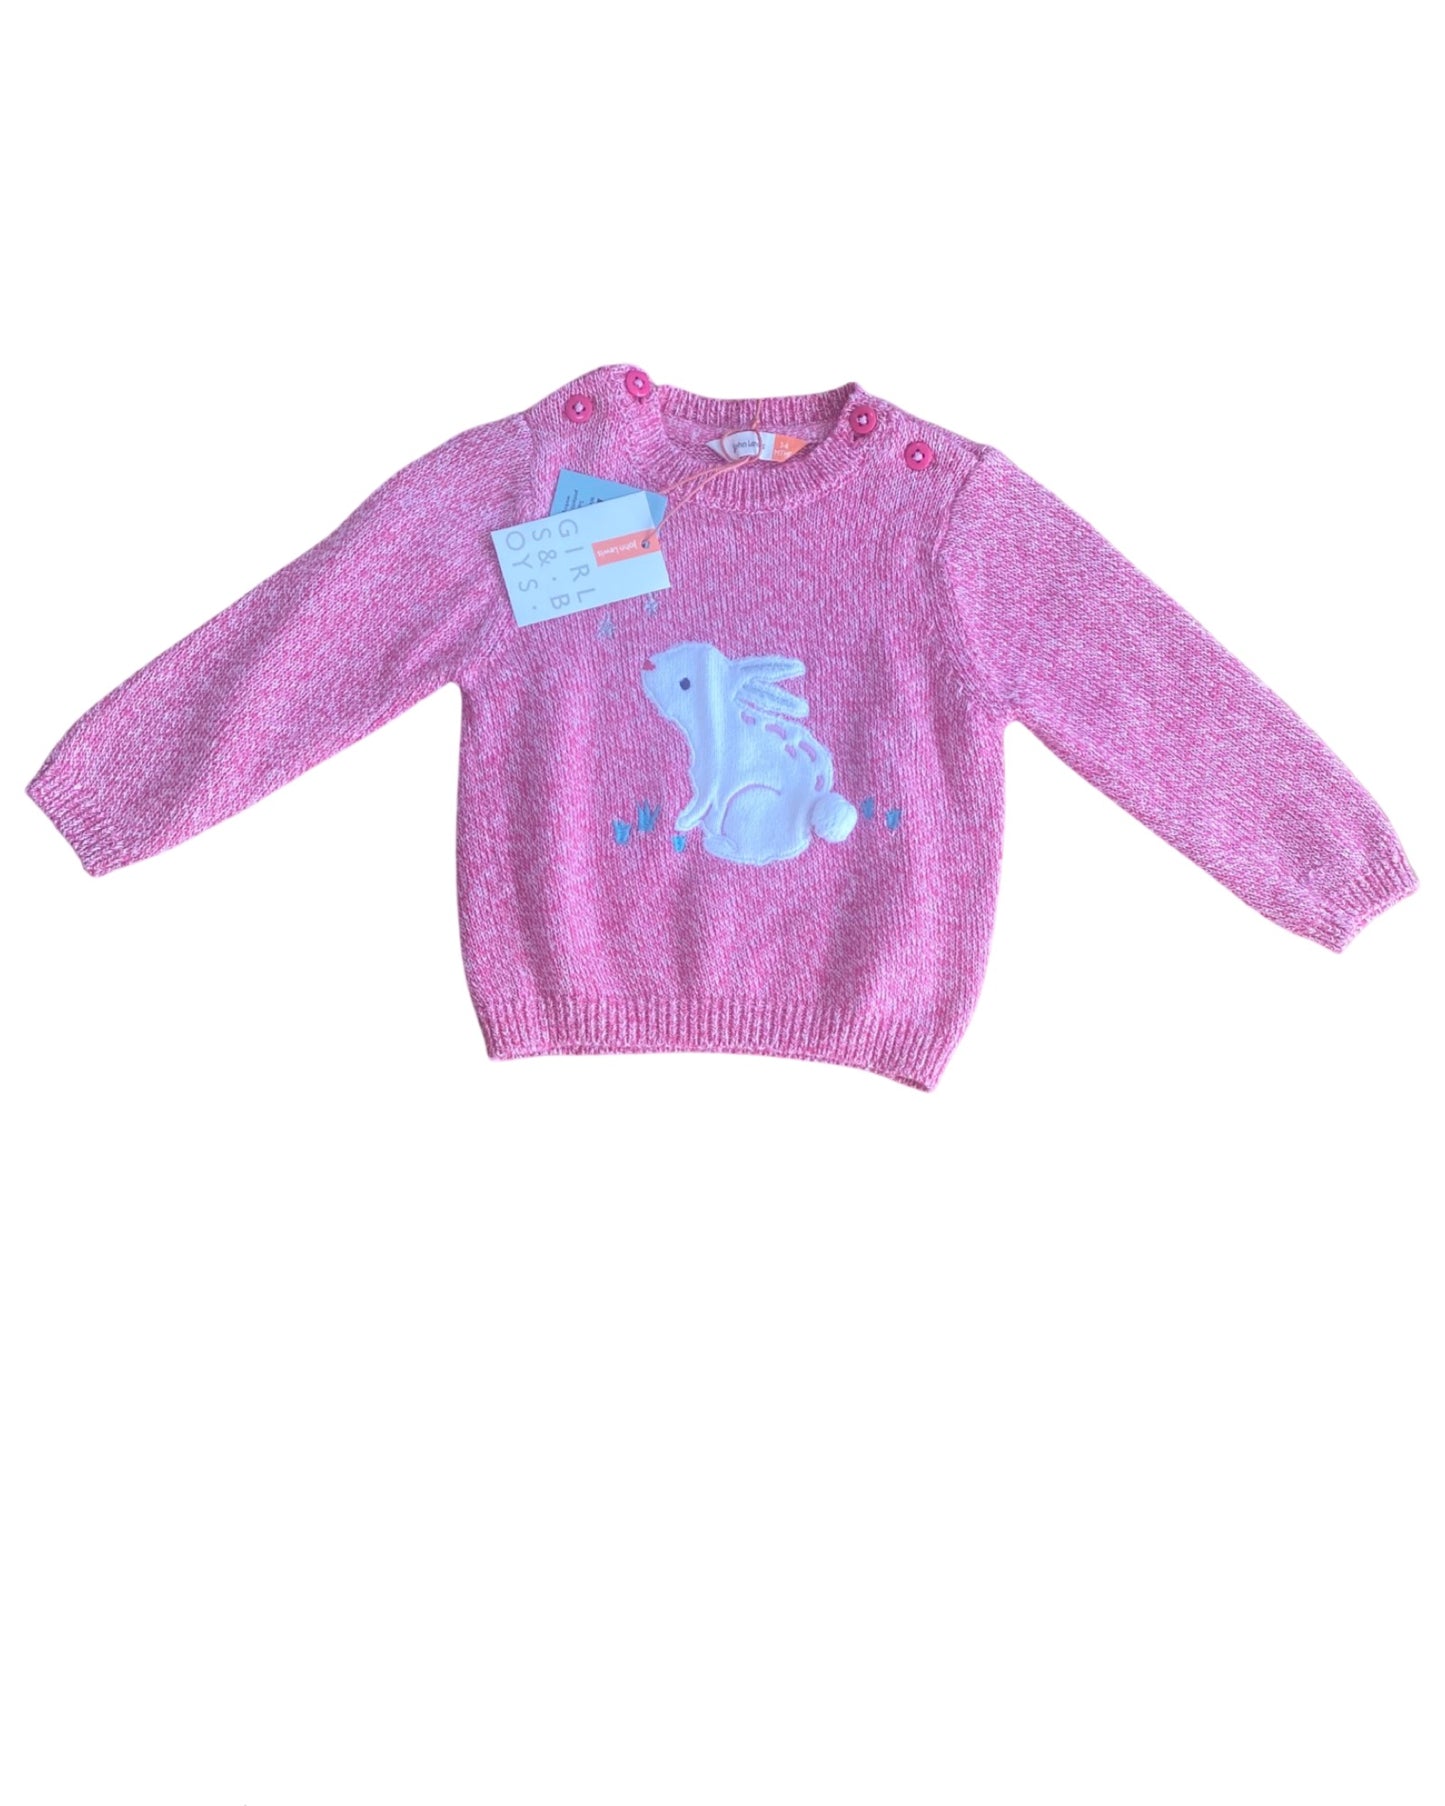 John Lewis knit jumper with embroidered bunny (3-6mths)